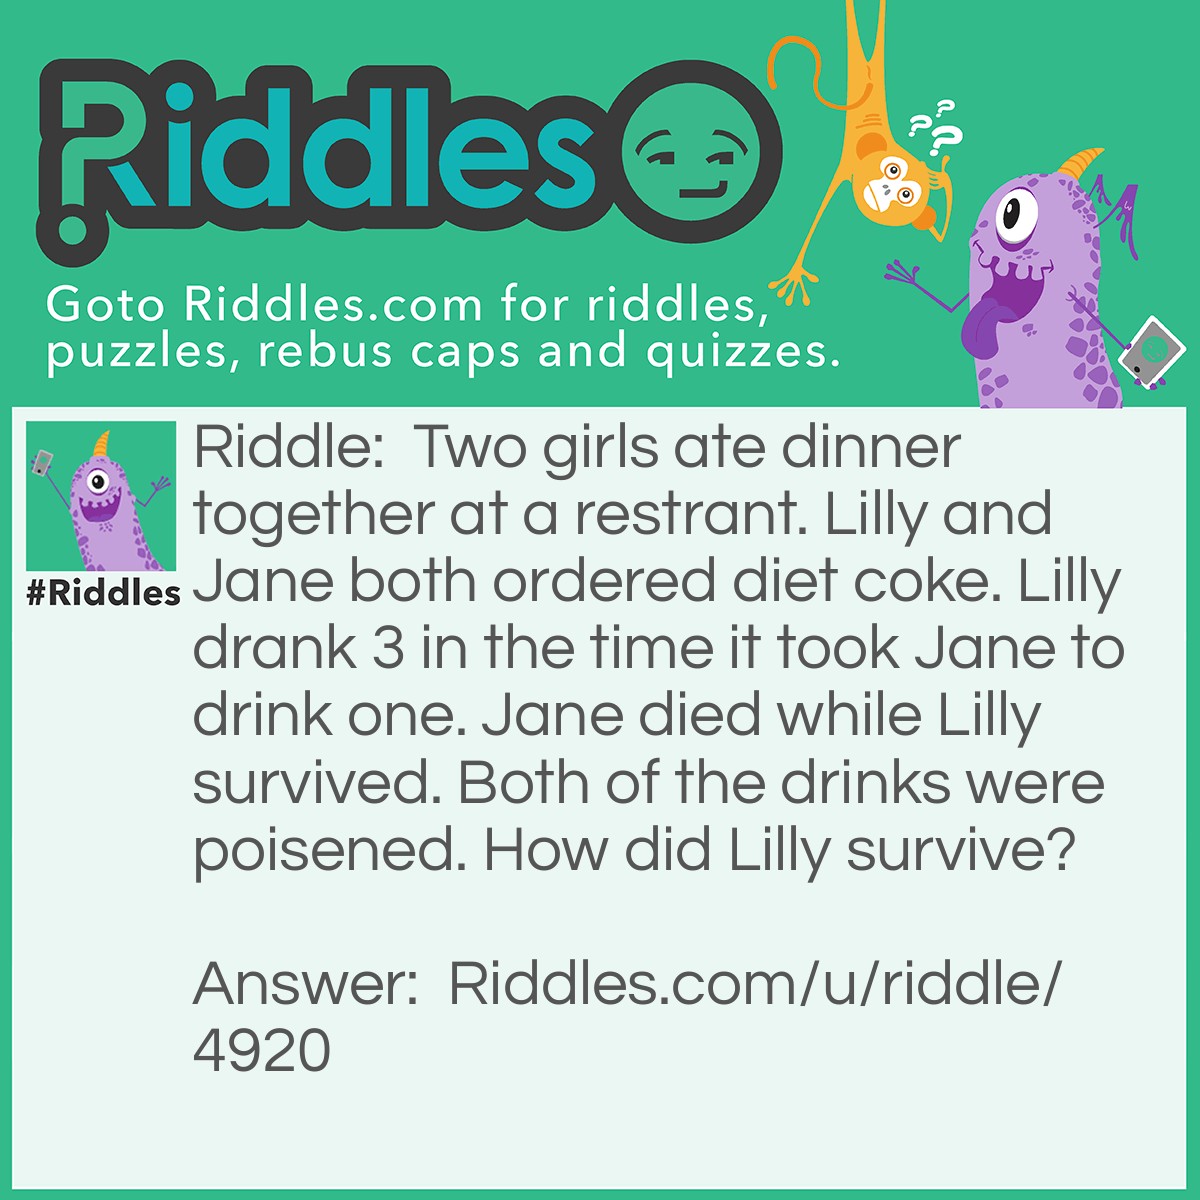 Riddle: Two girls ate dinner together at a restrant. Lilly and Jane both ordered diet coke. Lilly drank 3 in the time it took Jane to drink one. Jane died while Lilly survived. Both of the drinks were poisened. How did Lilly survive? Answer: The poison was in the ice.